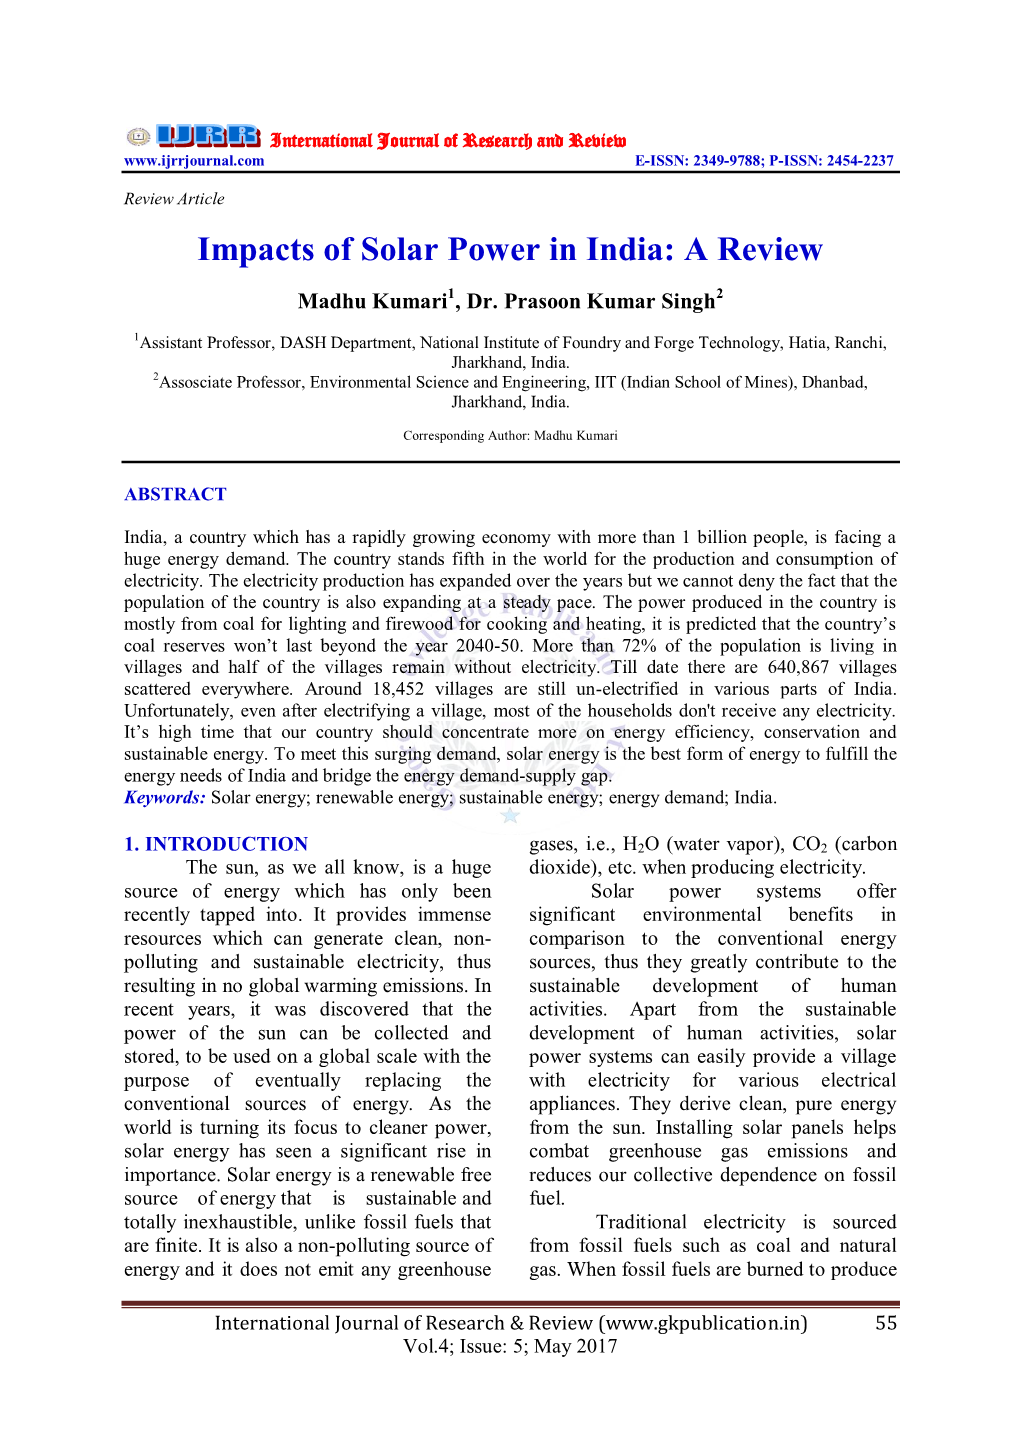 Impacts of Solar Power in India: a Review